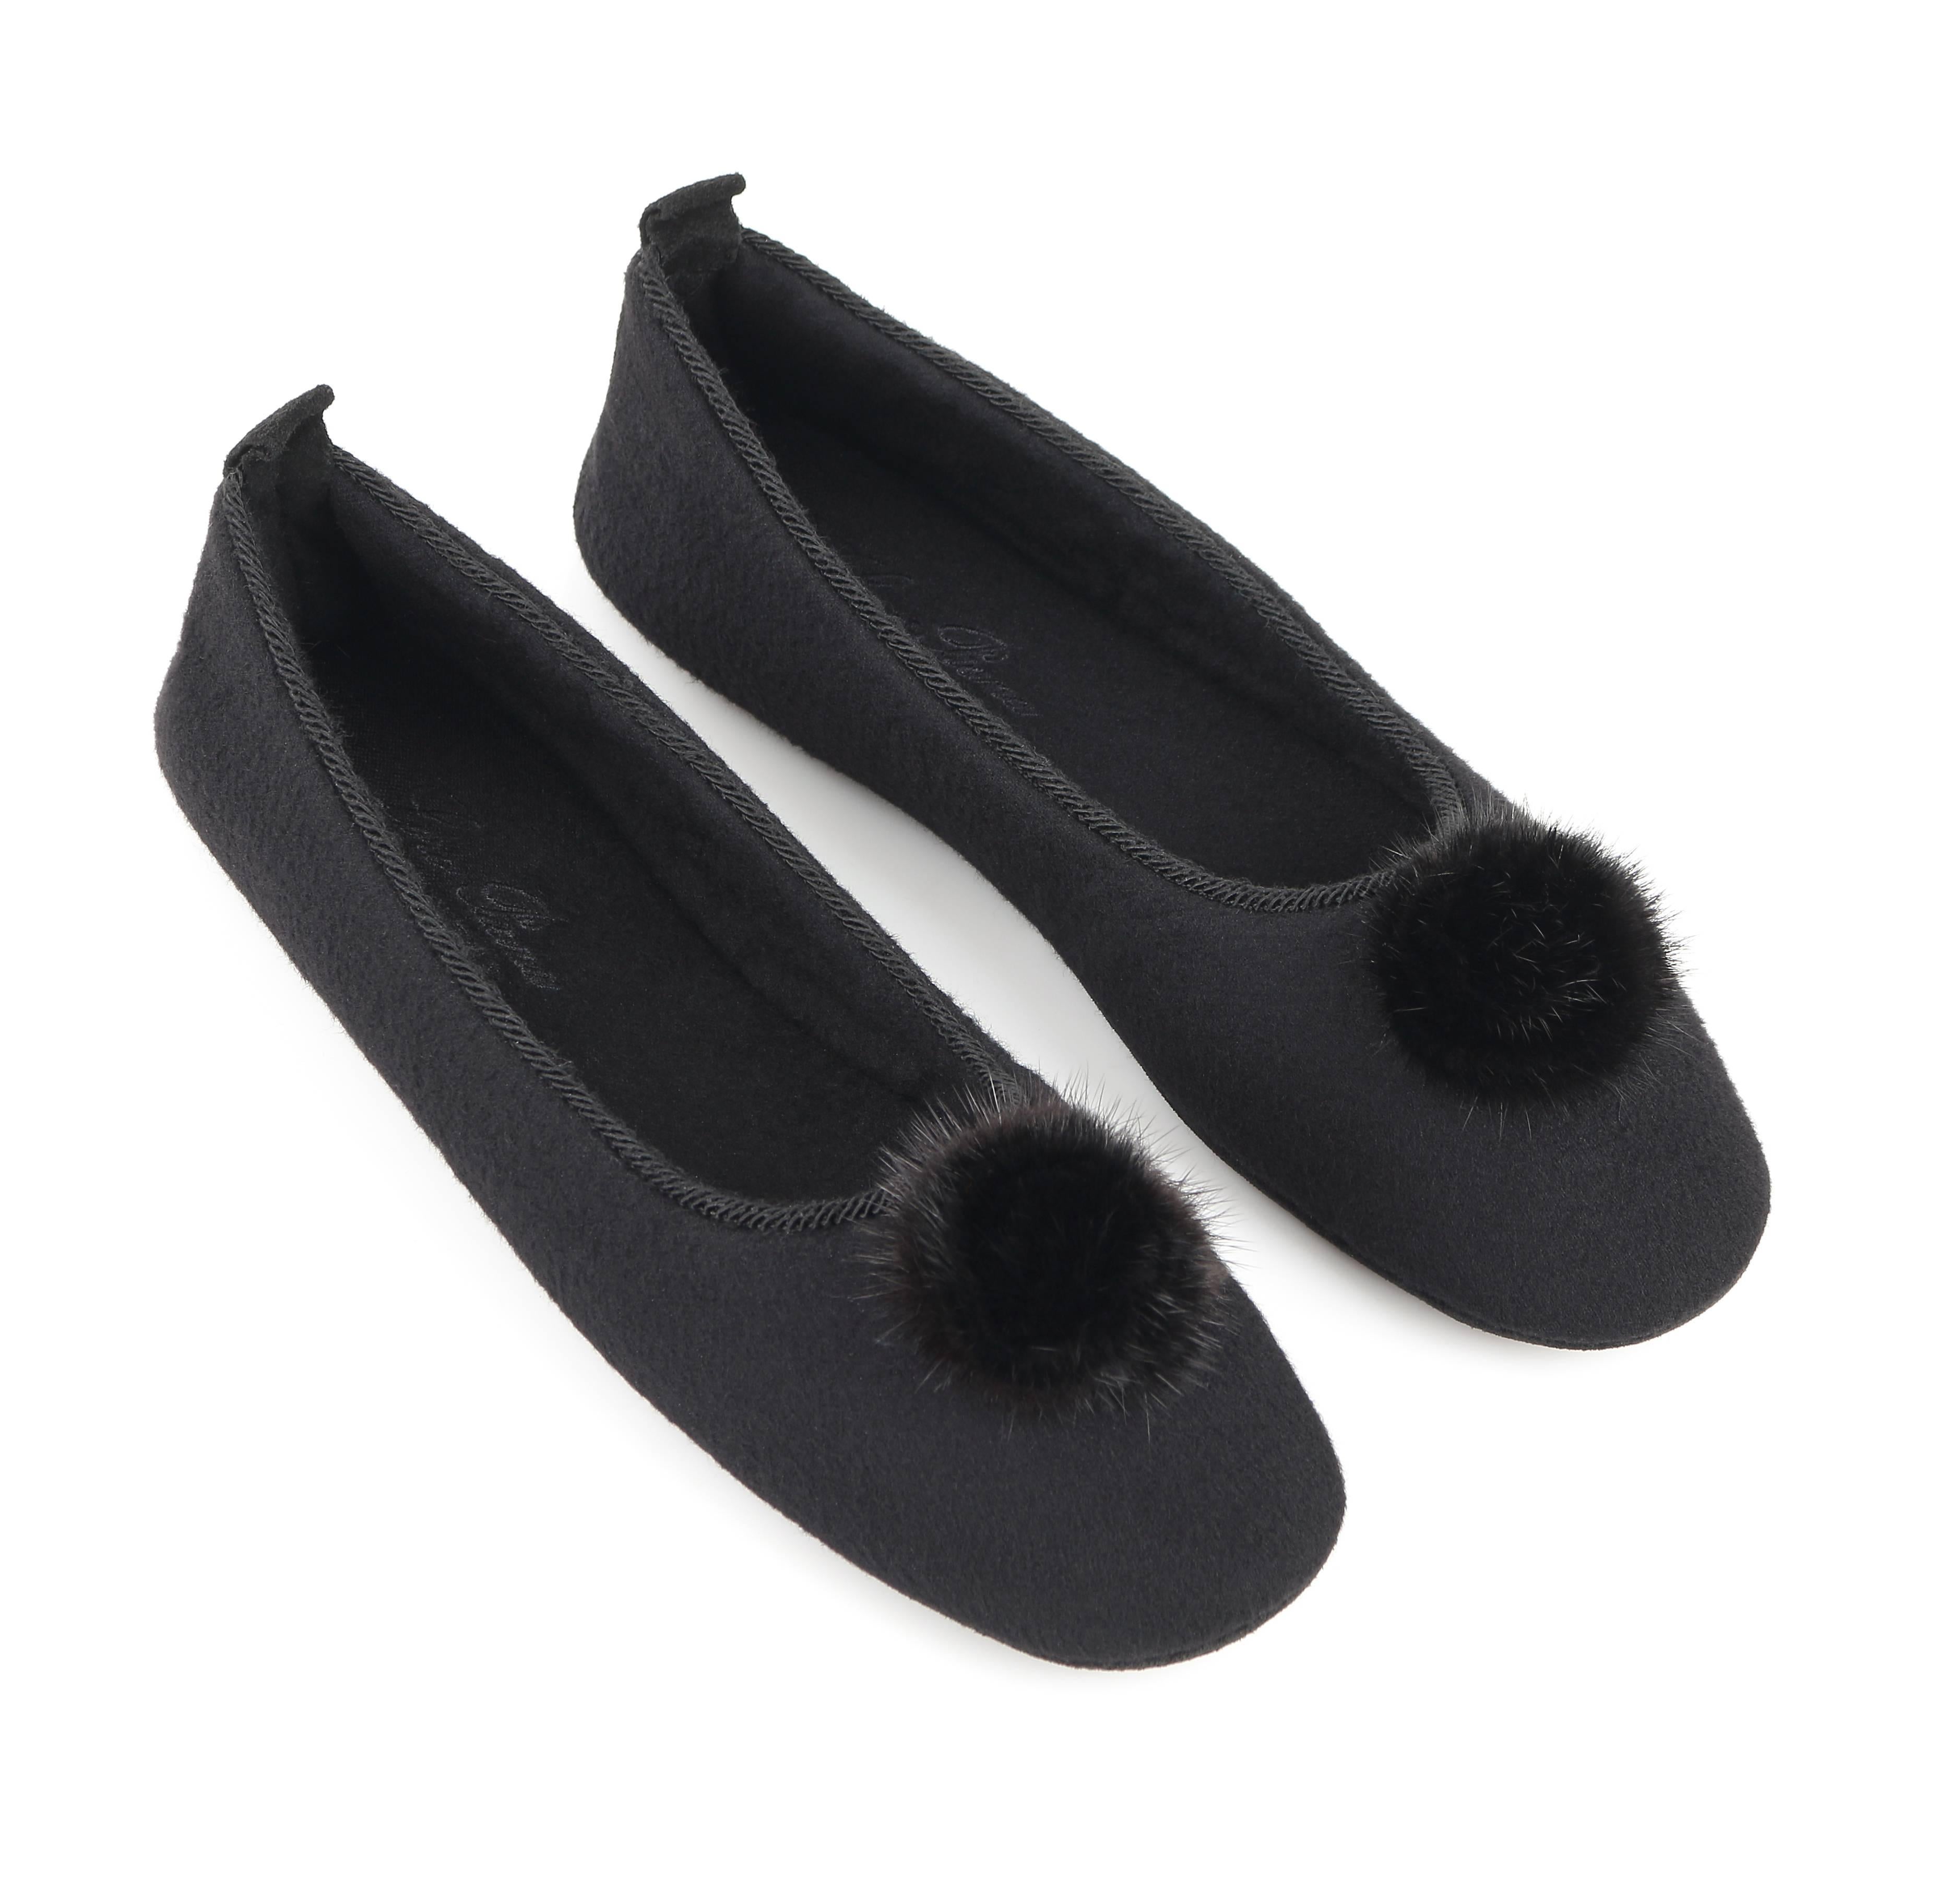 Loro Piana "Odette" black cashmere ballerina slippers. Black genuine mink pompom detail at toe. Black twisted rope detail along opening. Suede leather pull tab at back. Slip-on style. Original dust bag is included. Unmarked Material: